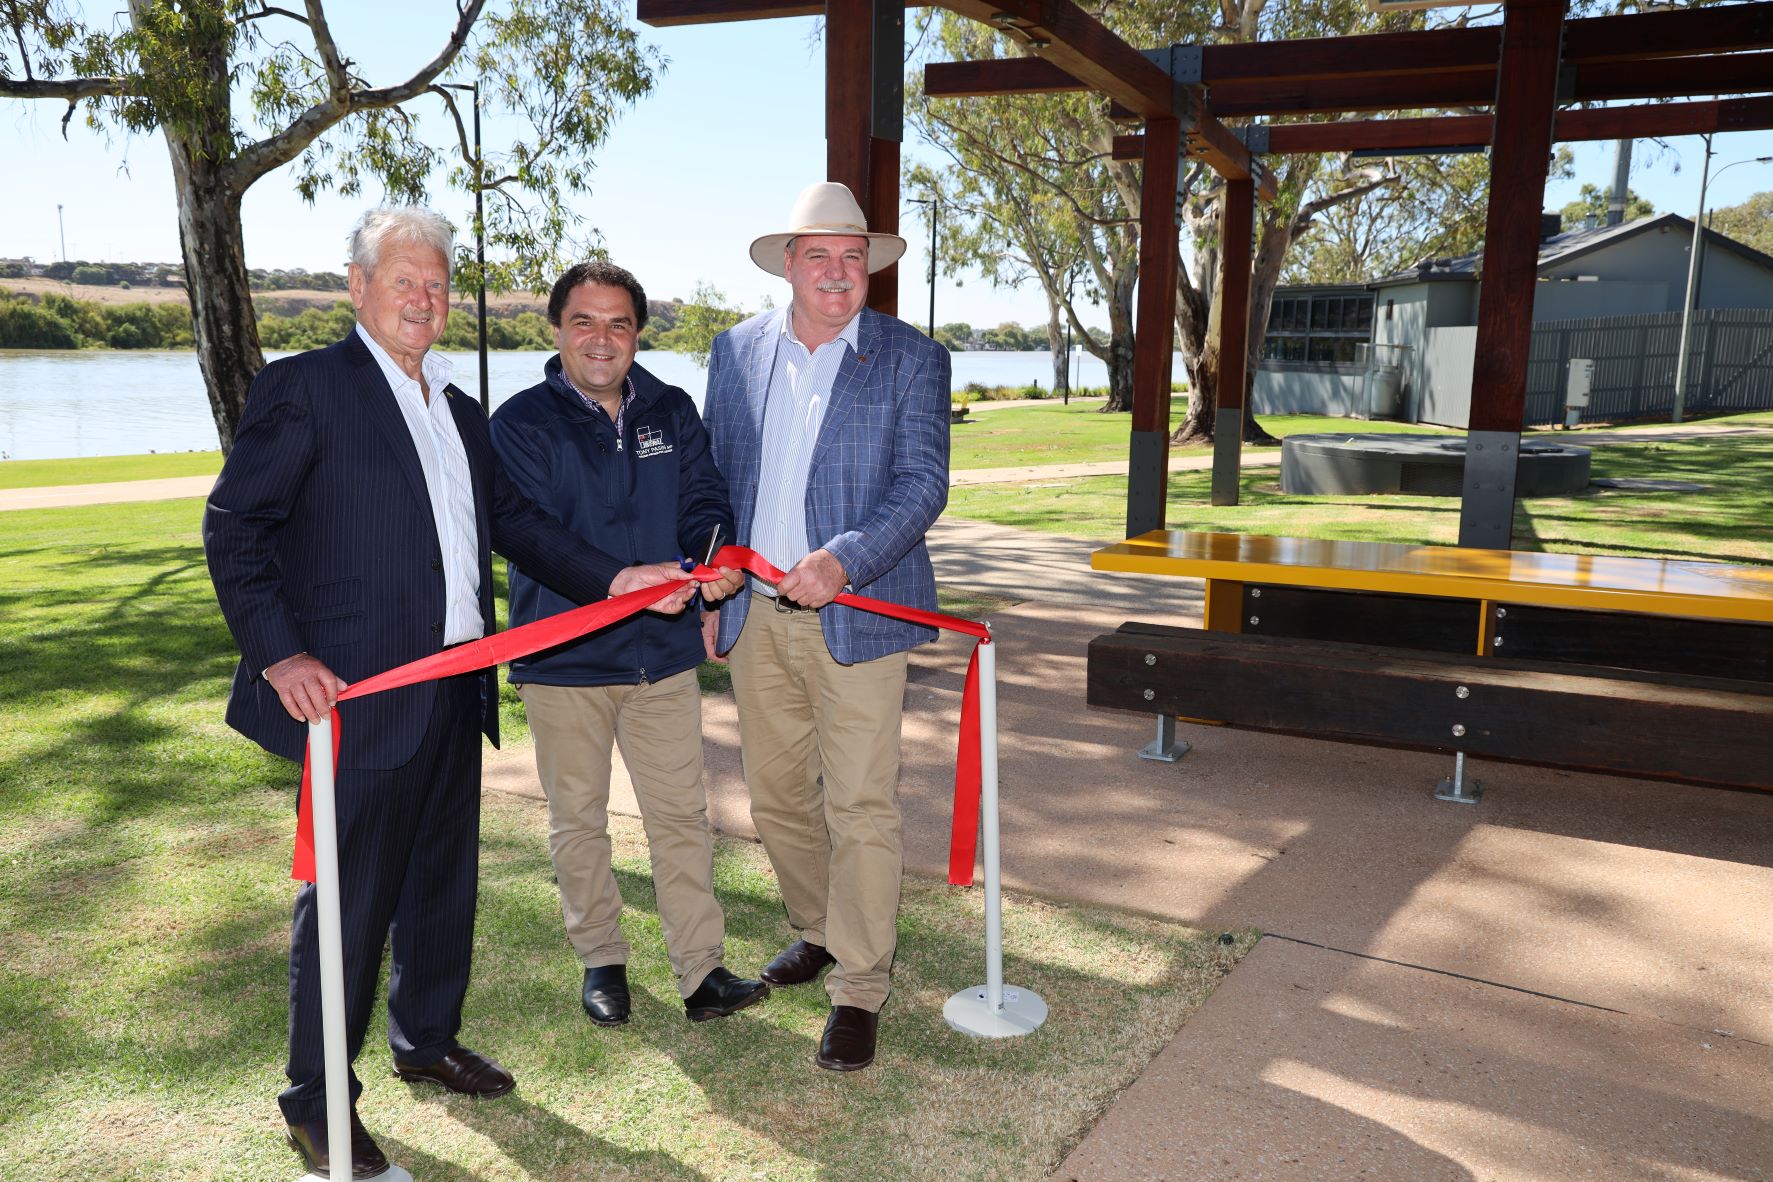 STAGE 1 OF THE STURT RESERVE REDEVELOPMENT - THE RECREATION PRECINCT OFFICIAL OPENING